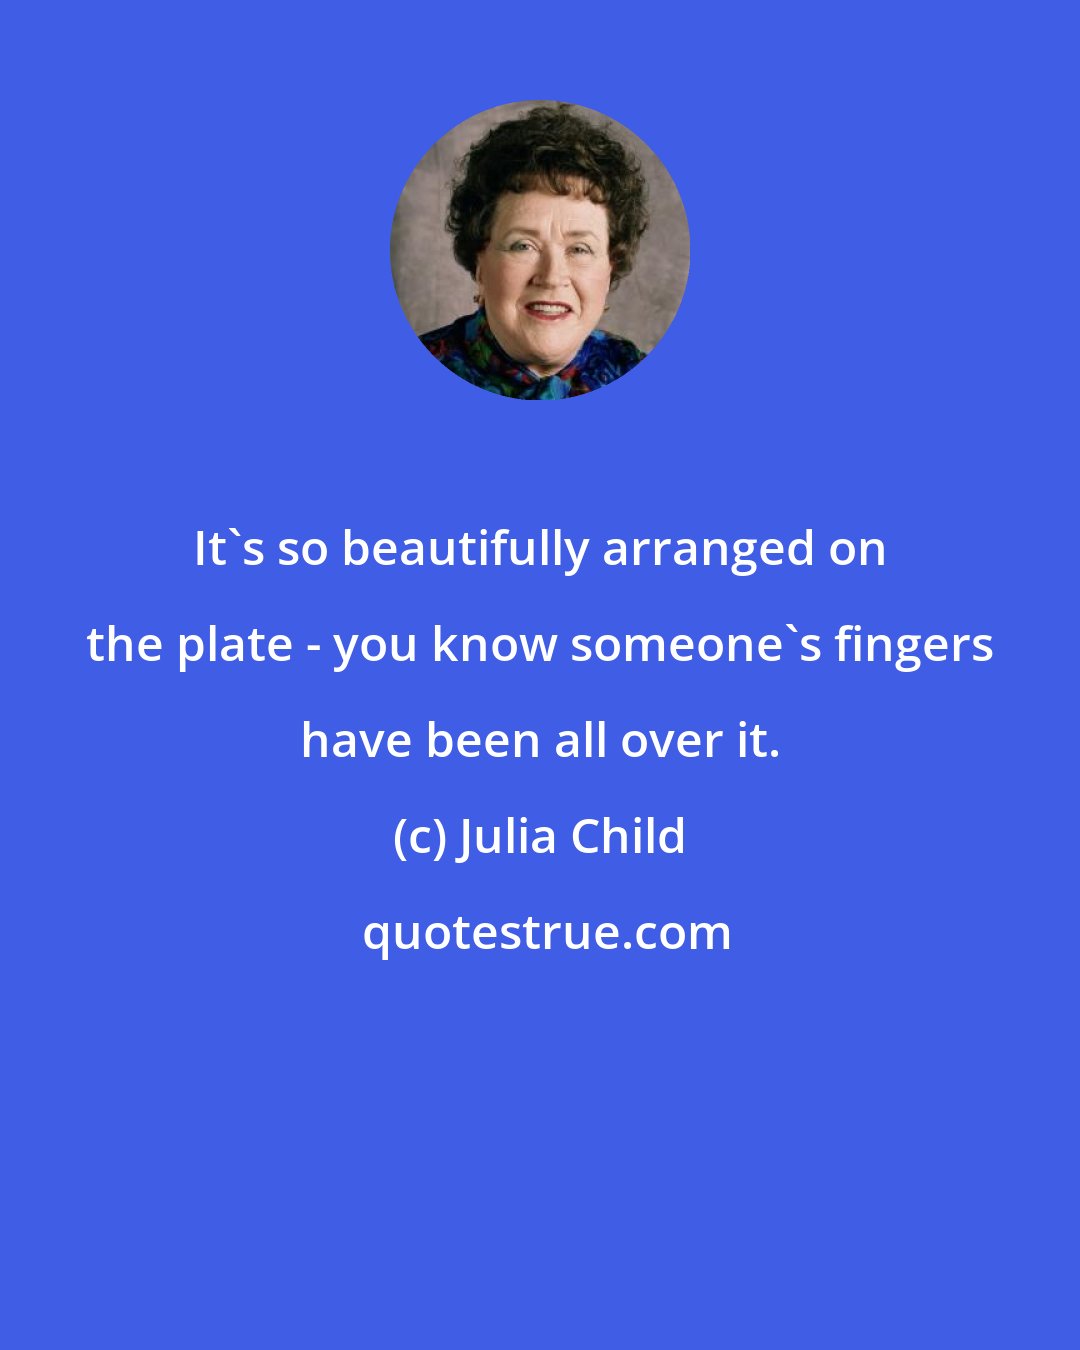 Julia Child: It's so beautifully arranged on the plate - you know someone's fingers have been all over it.